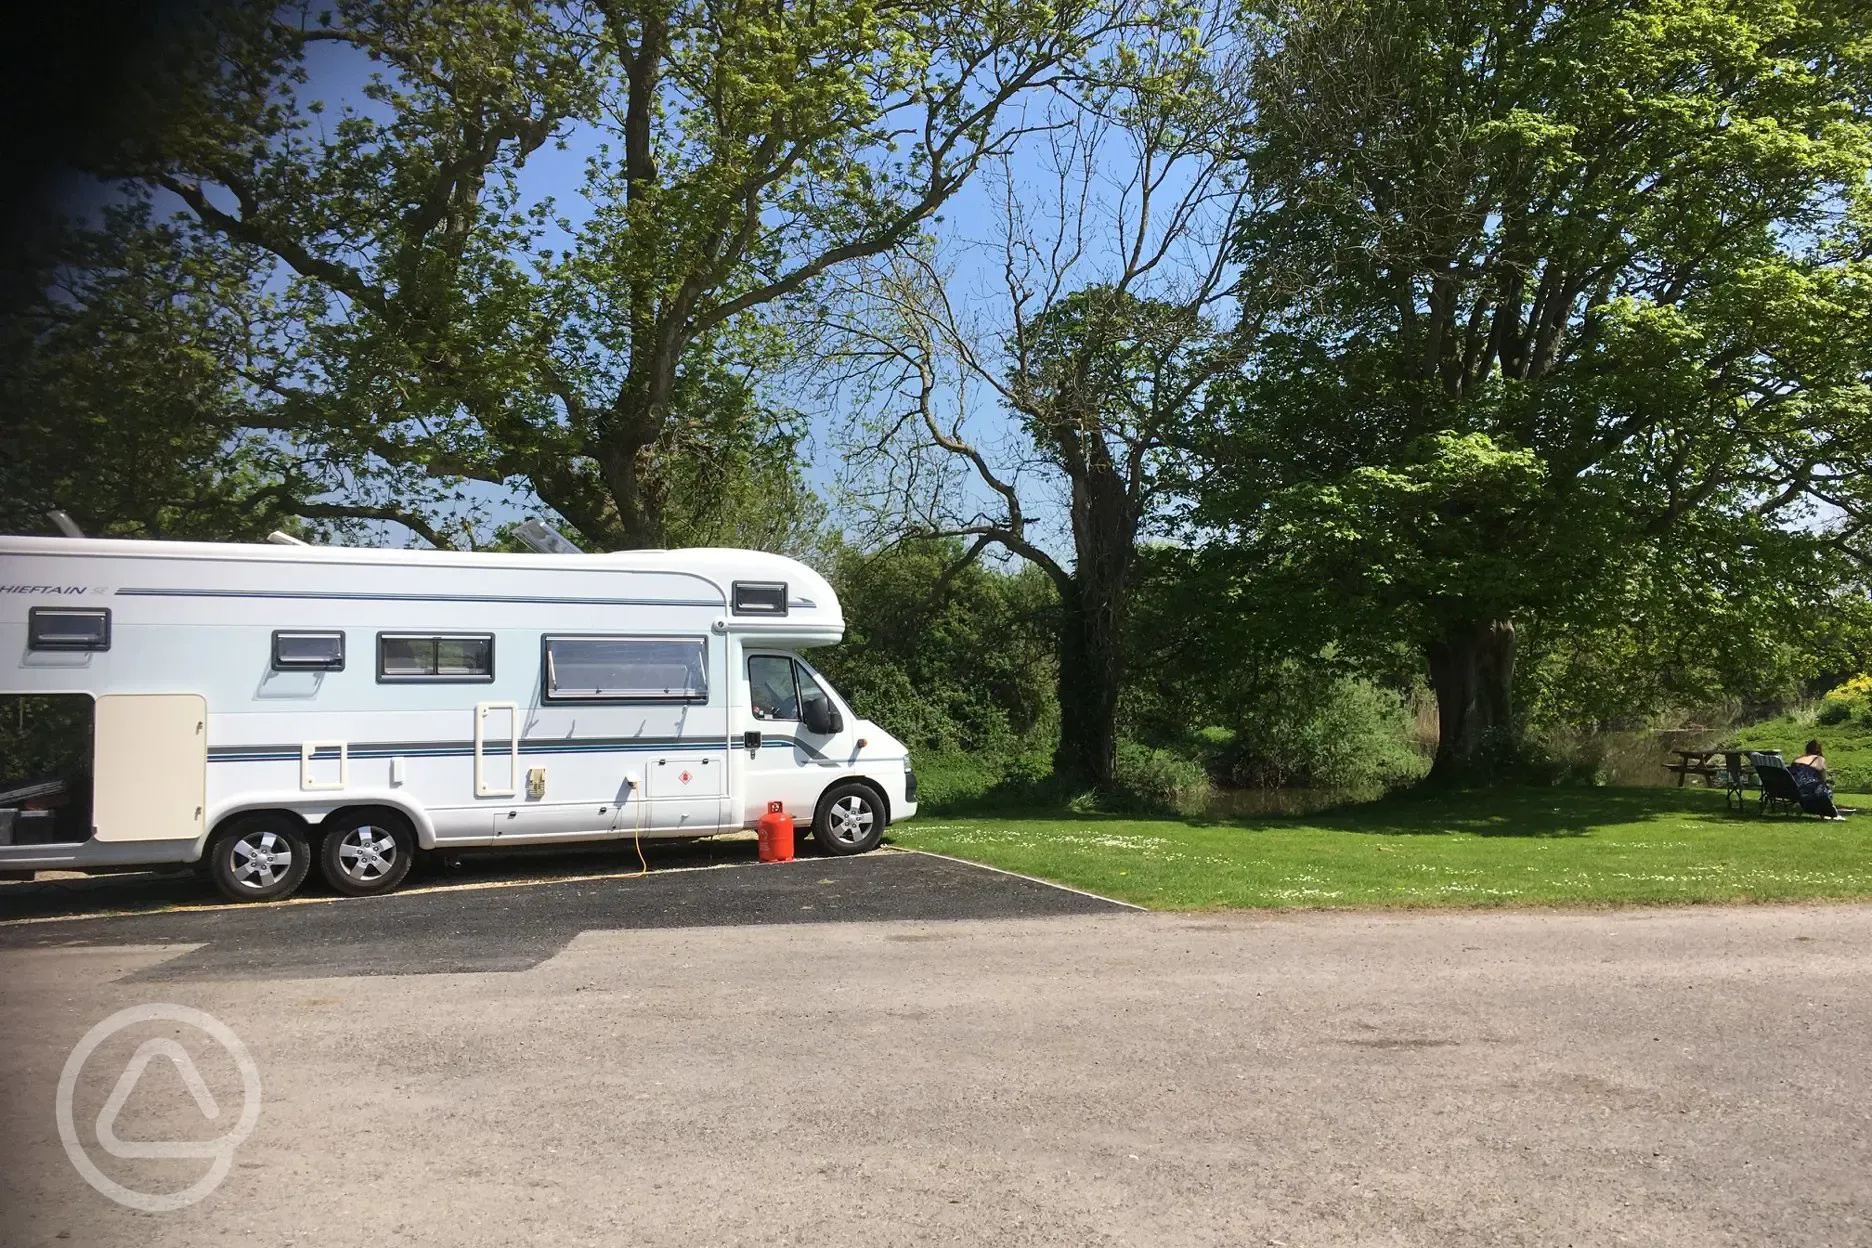 Fully serviced hardstanding pitches - riverside